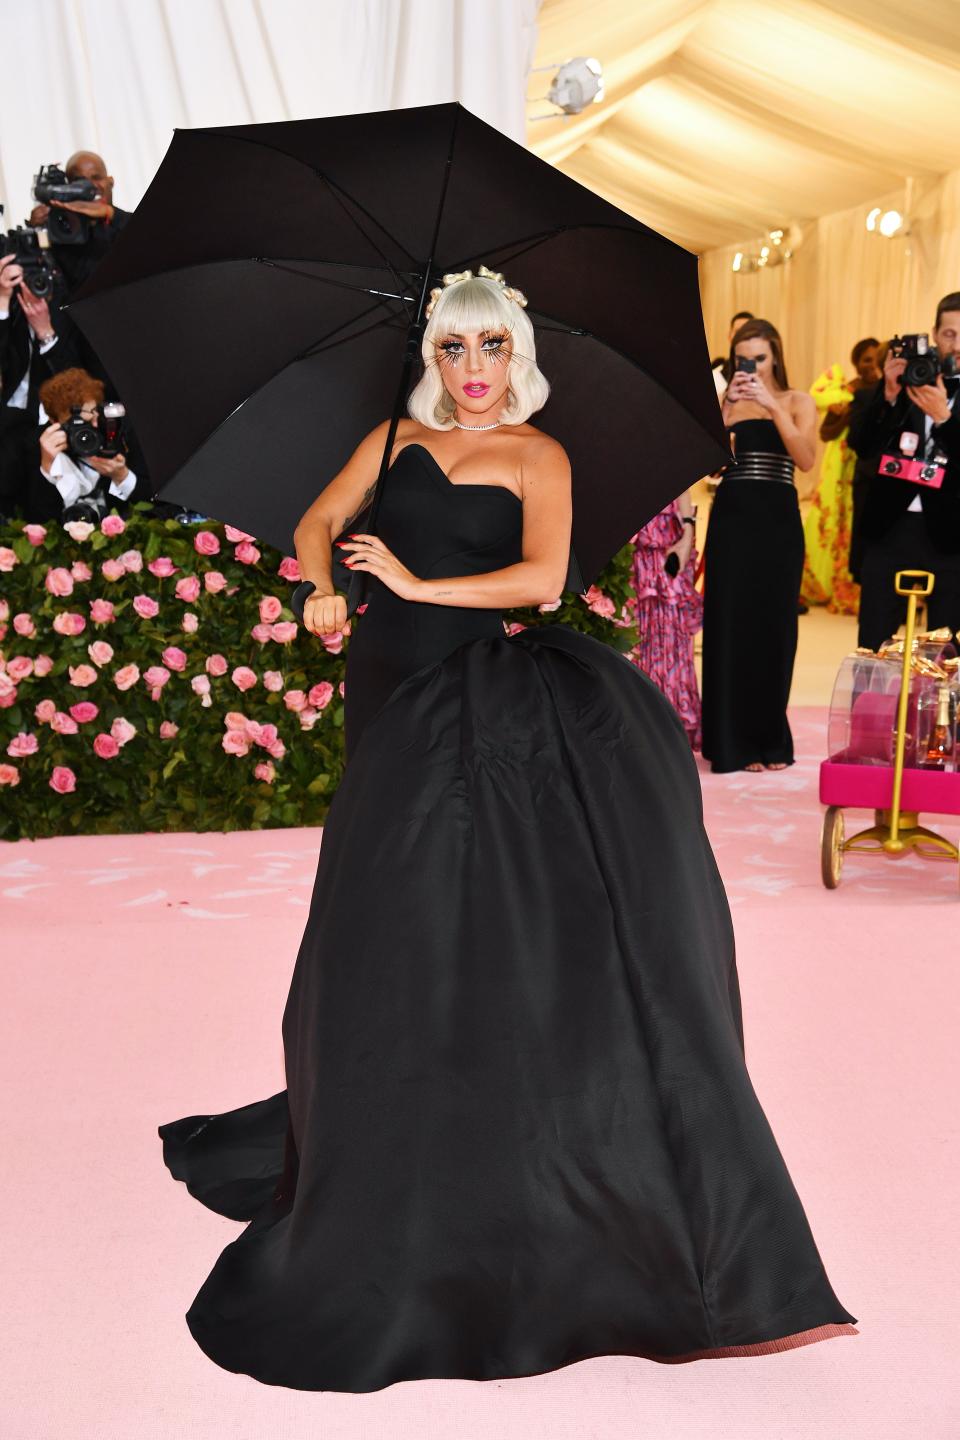 lady gaga attends the met gala in 2019 wearing black gown and carrying an umbrella